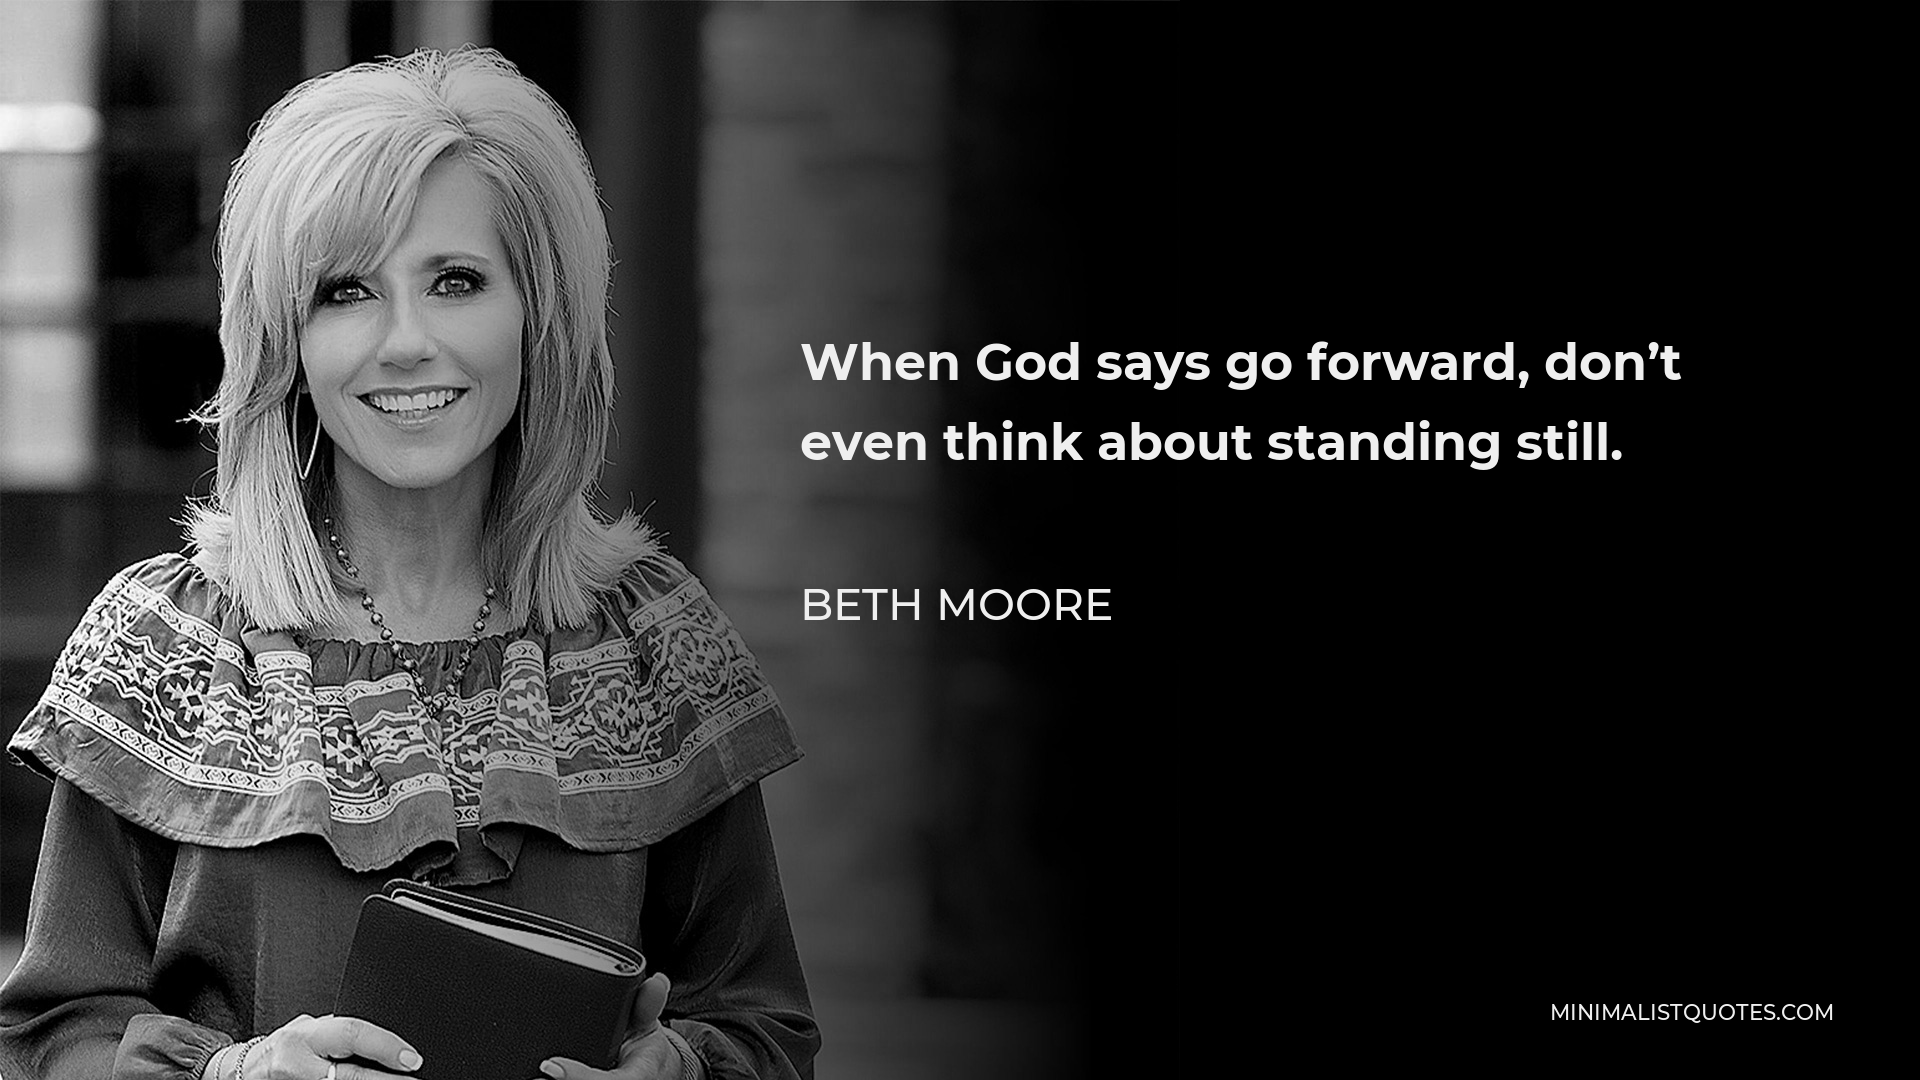 Beth Moore Quote: When God says go forward, don't even think about ...